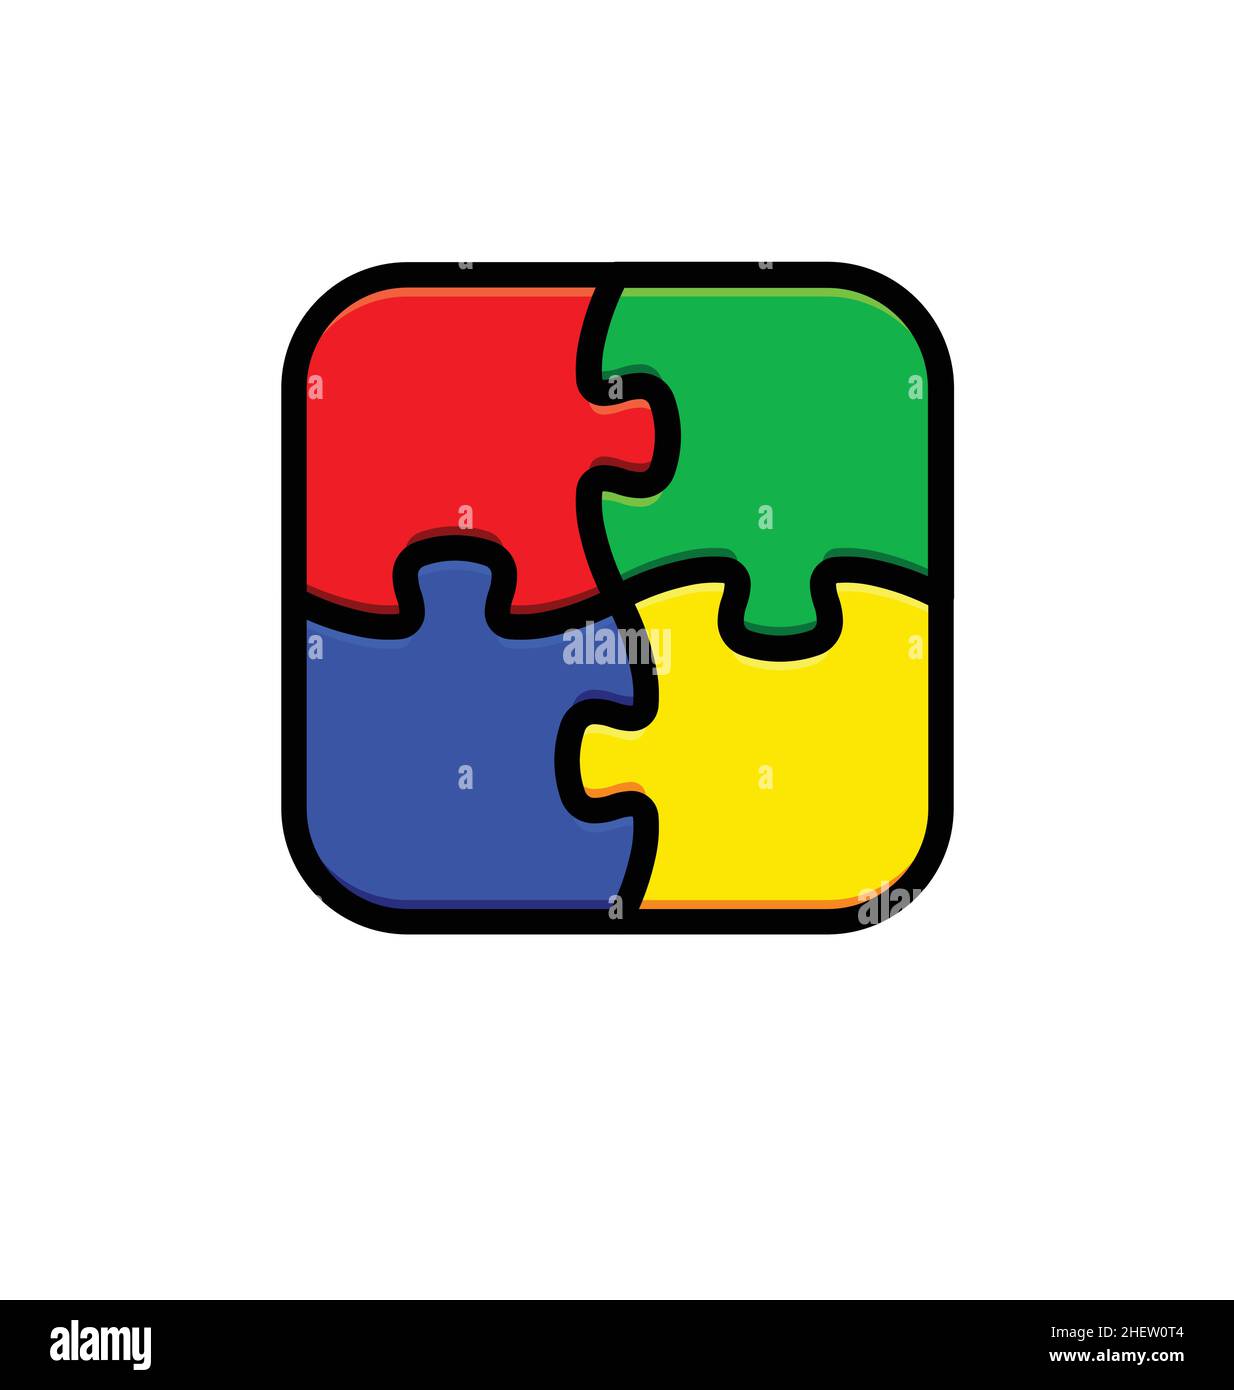 4 Simple Symmetrical Colored Puzzle Pieces Connected Together Line Drawing Logo Blue Green